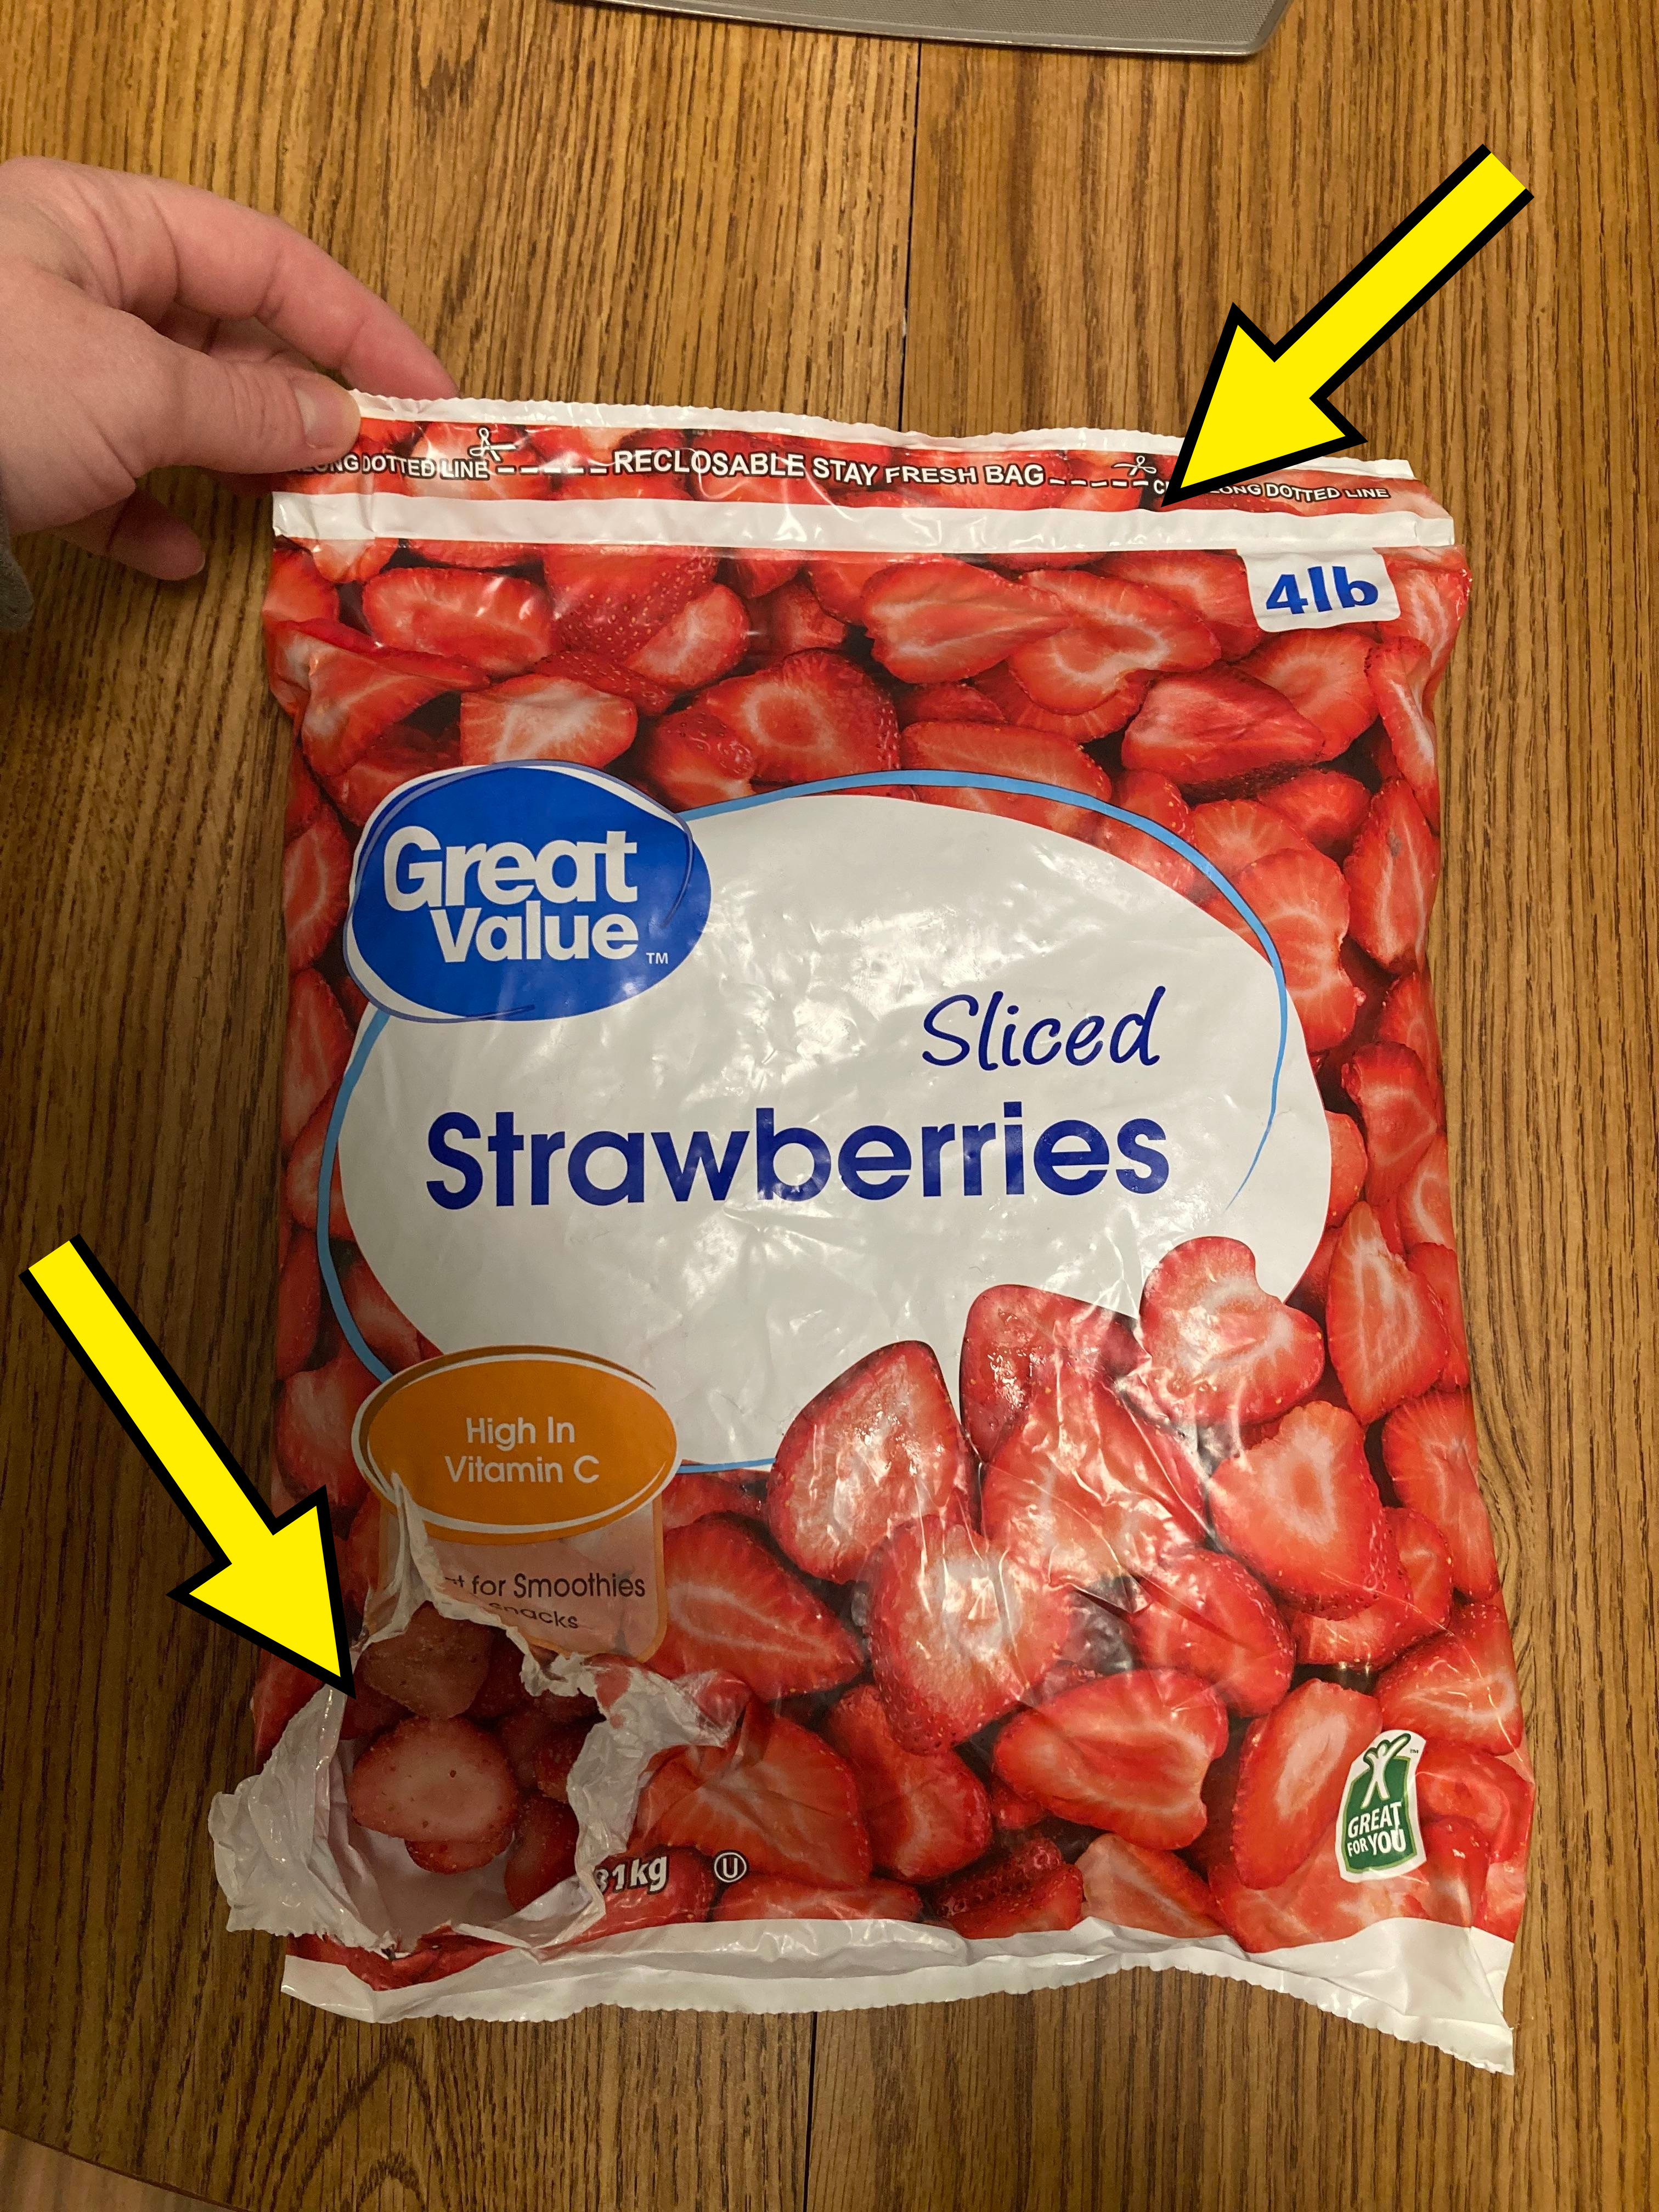 A hand holding a Great Value brand bag of sliced strawberries. Text highlights &#x27;High in Vitamin C&#x27; and &#x27;for Smoothies.&#x27;